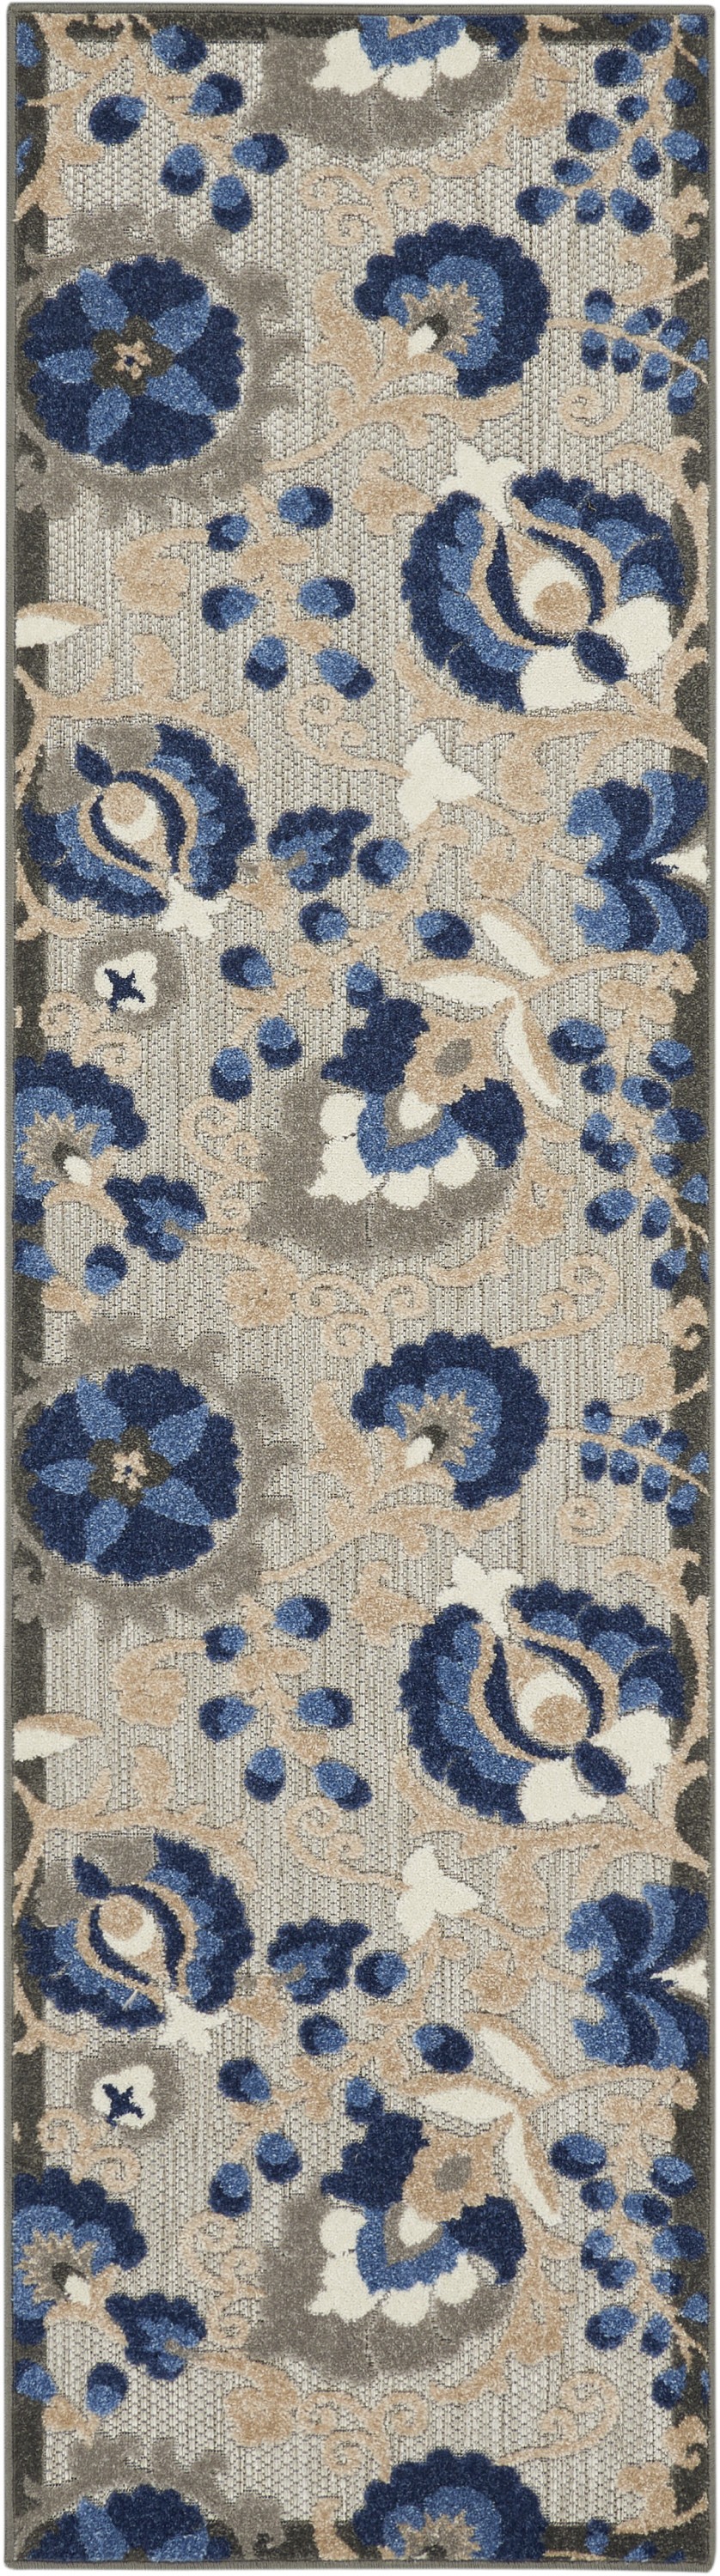 2' X 6' Blue And Gray Floral Indoor Outdoor Area Rug-384852-1